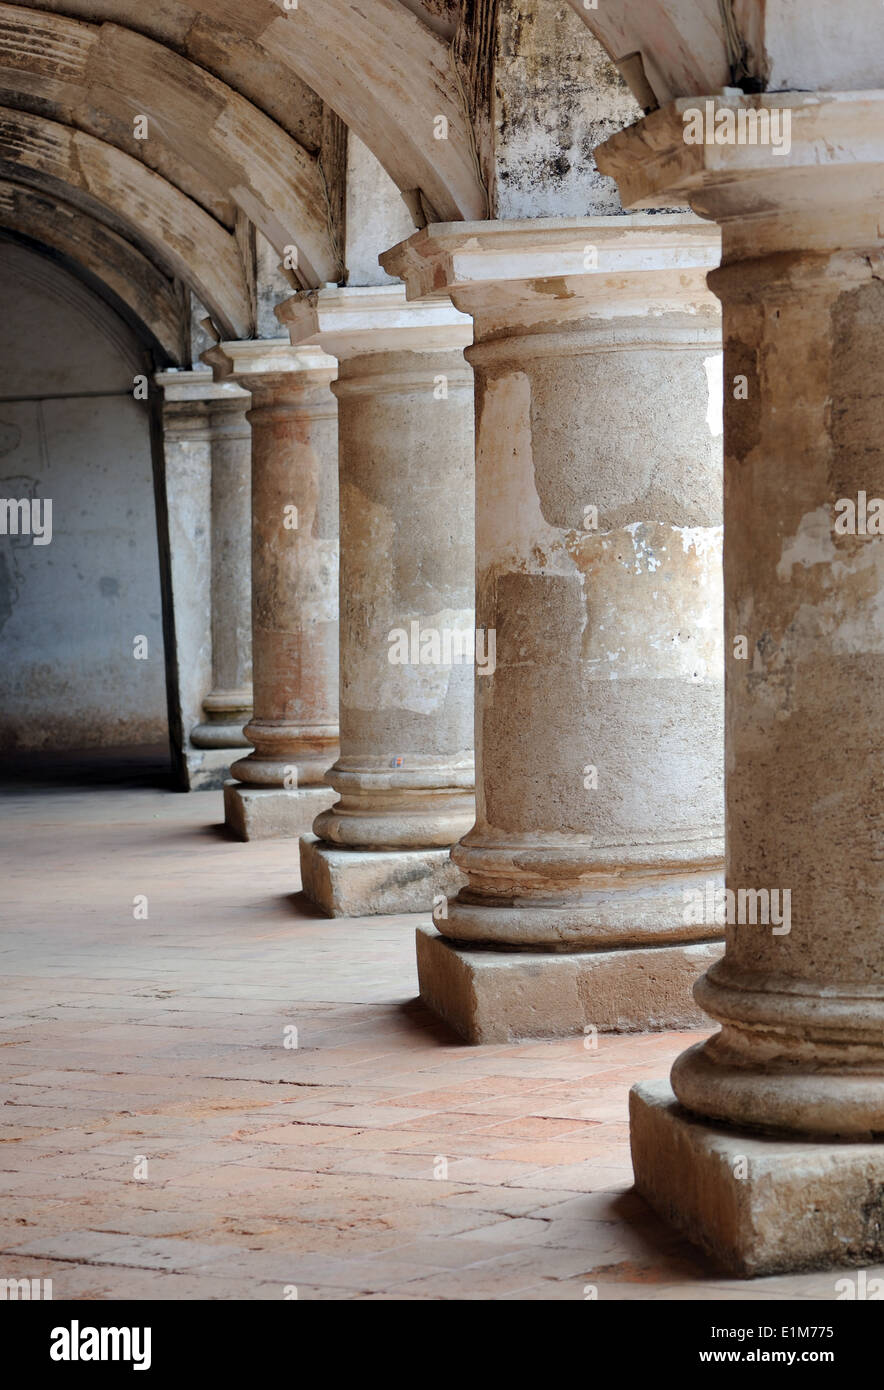 A colonnade of stout, earthquake proof pillars in the deserted Las Capuchinas convent.  Antigua Guatemala, Republic of Guatemala Stock Photo